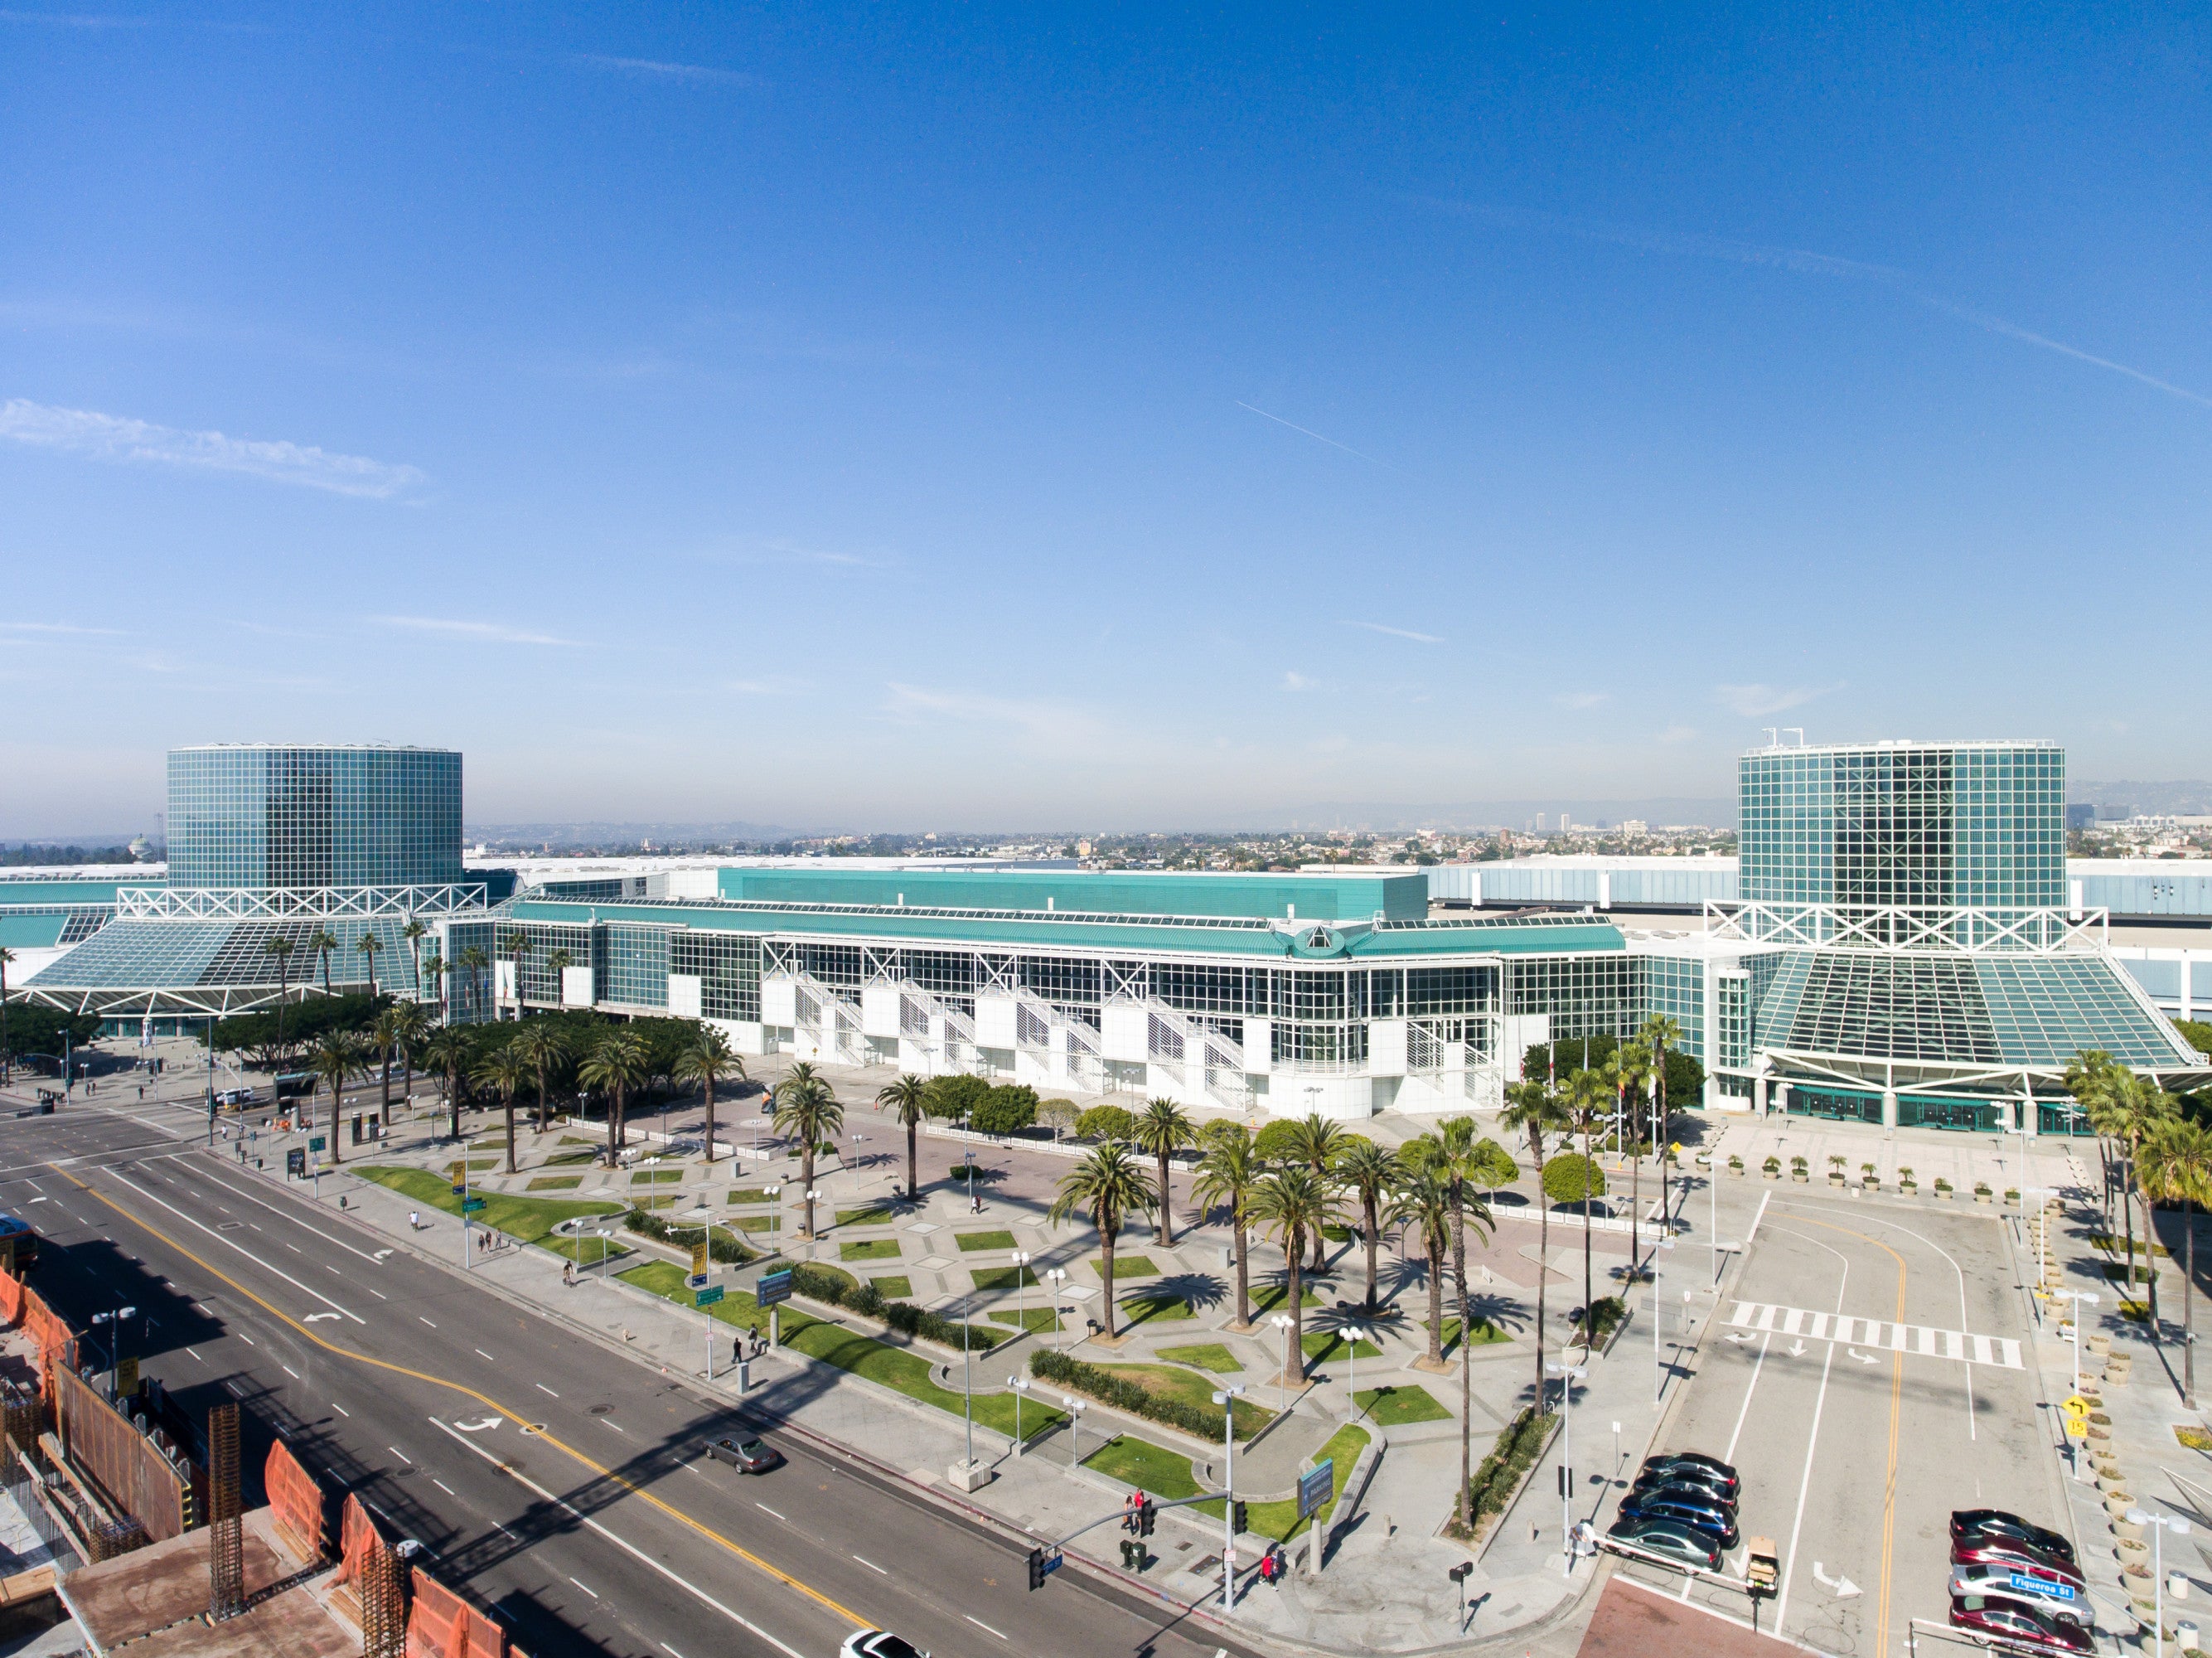 Los Angeles Convention Center Discover Los Angeles